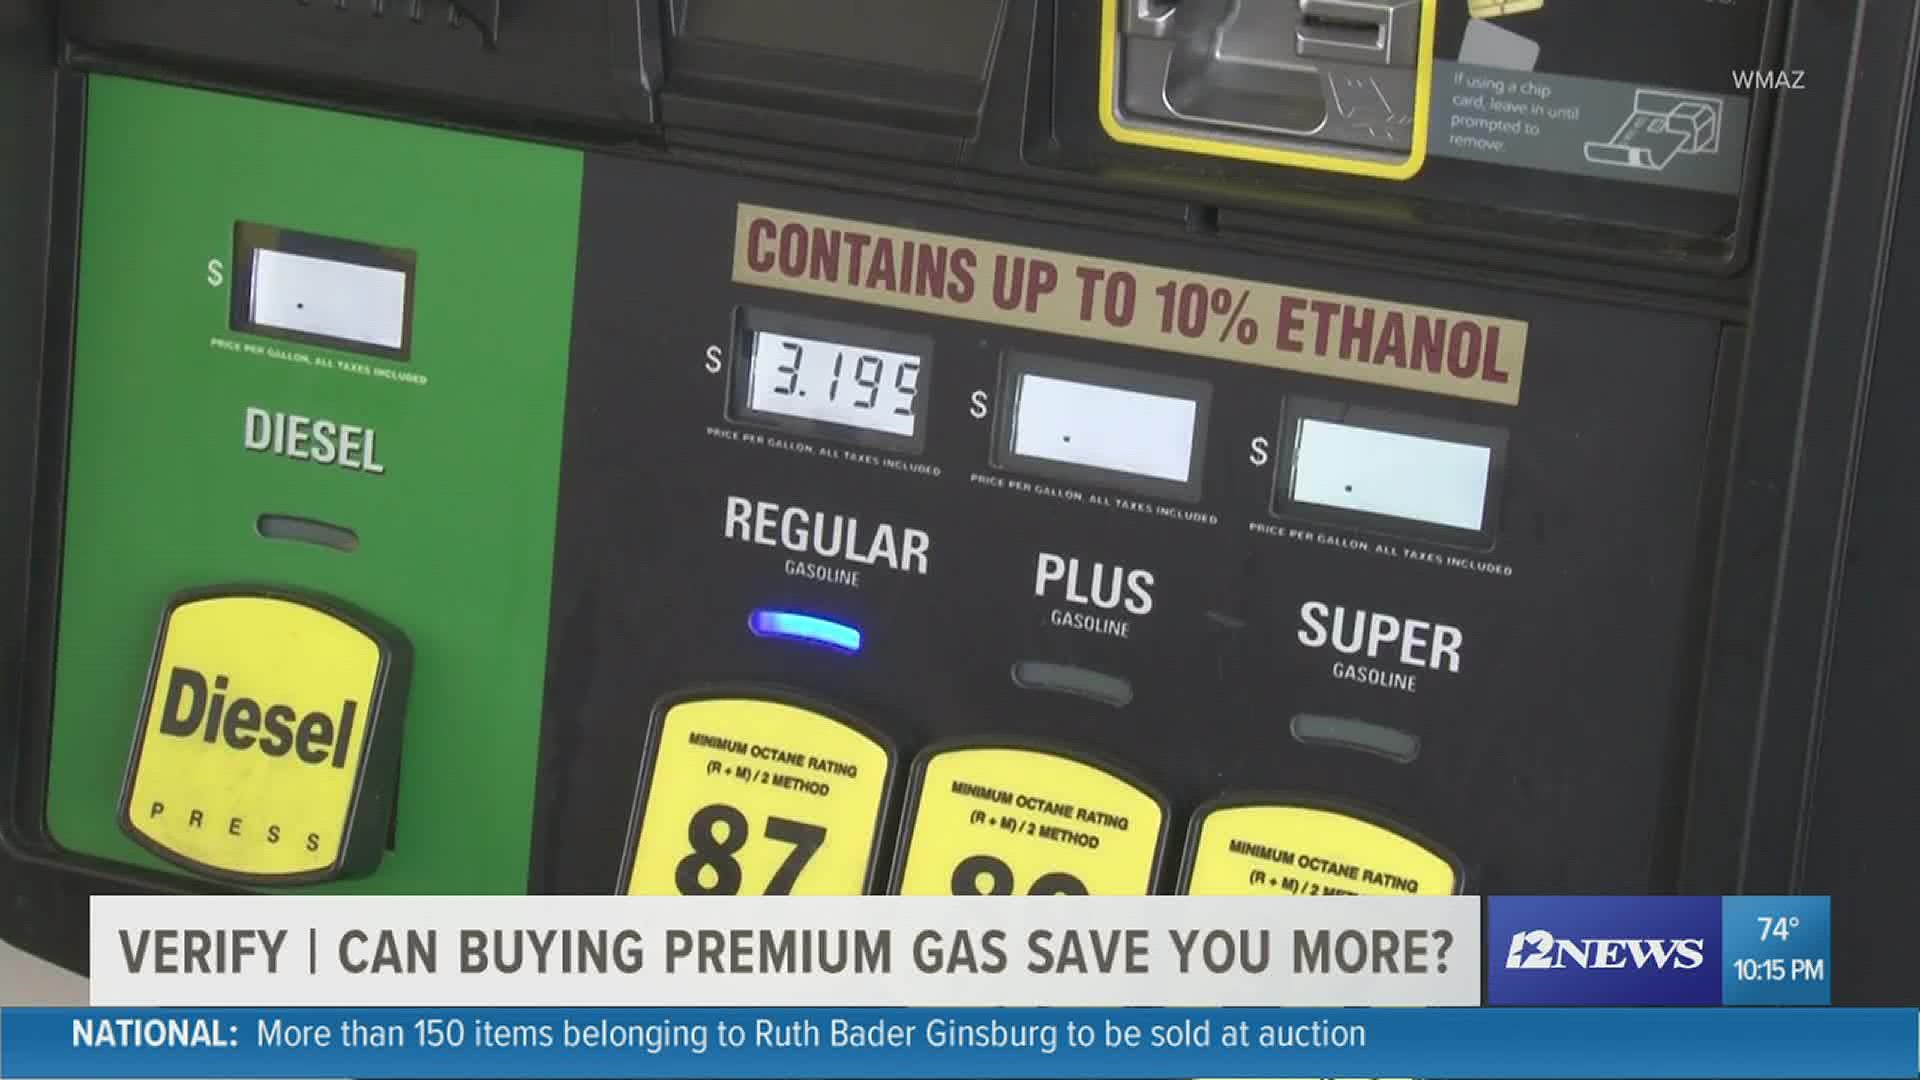 As gas prices continue to climb, people are looking for forms of relief at the pump.